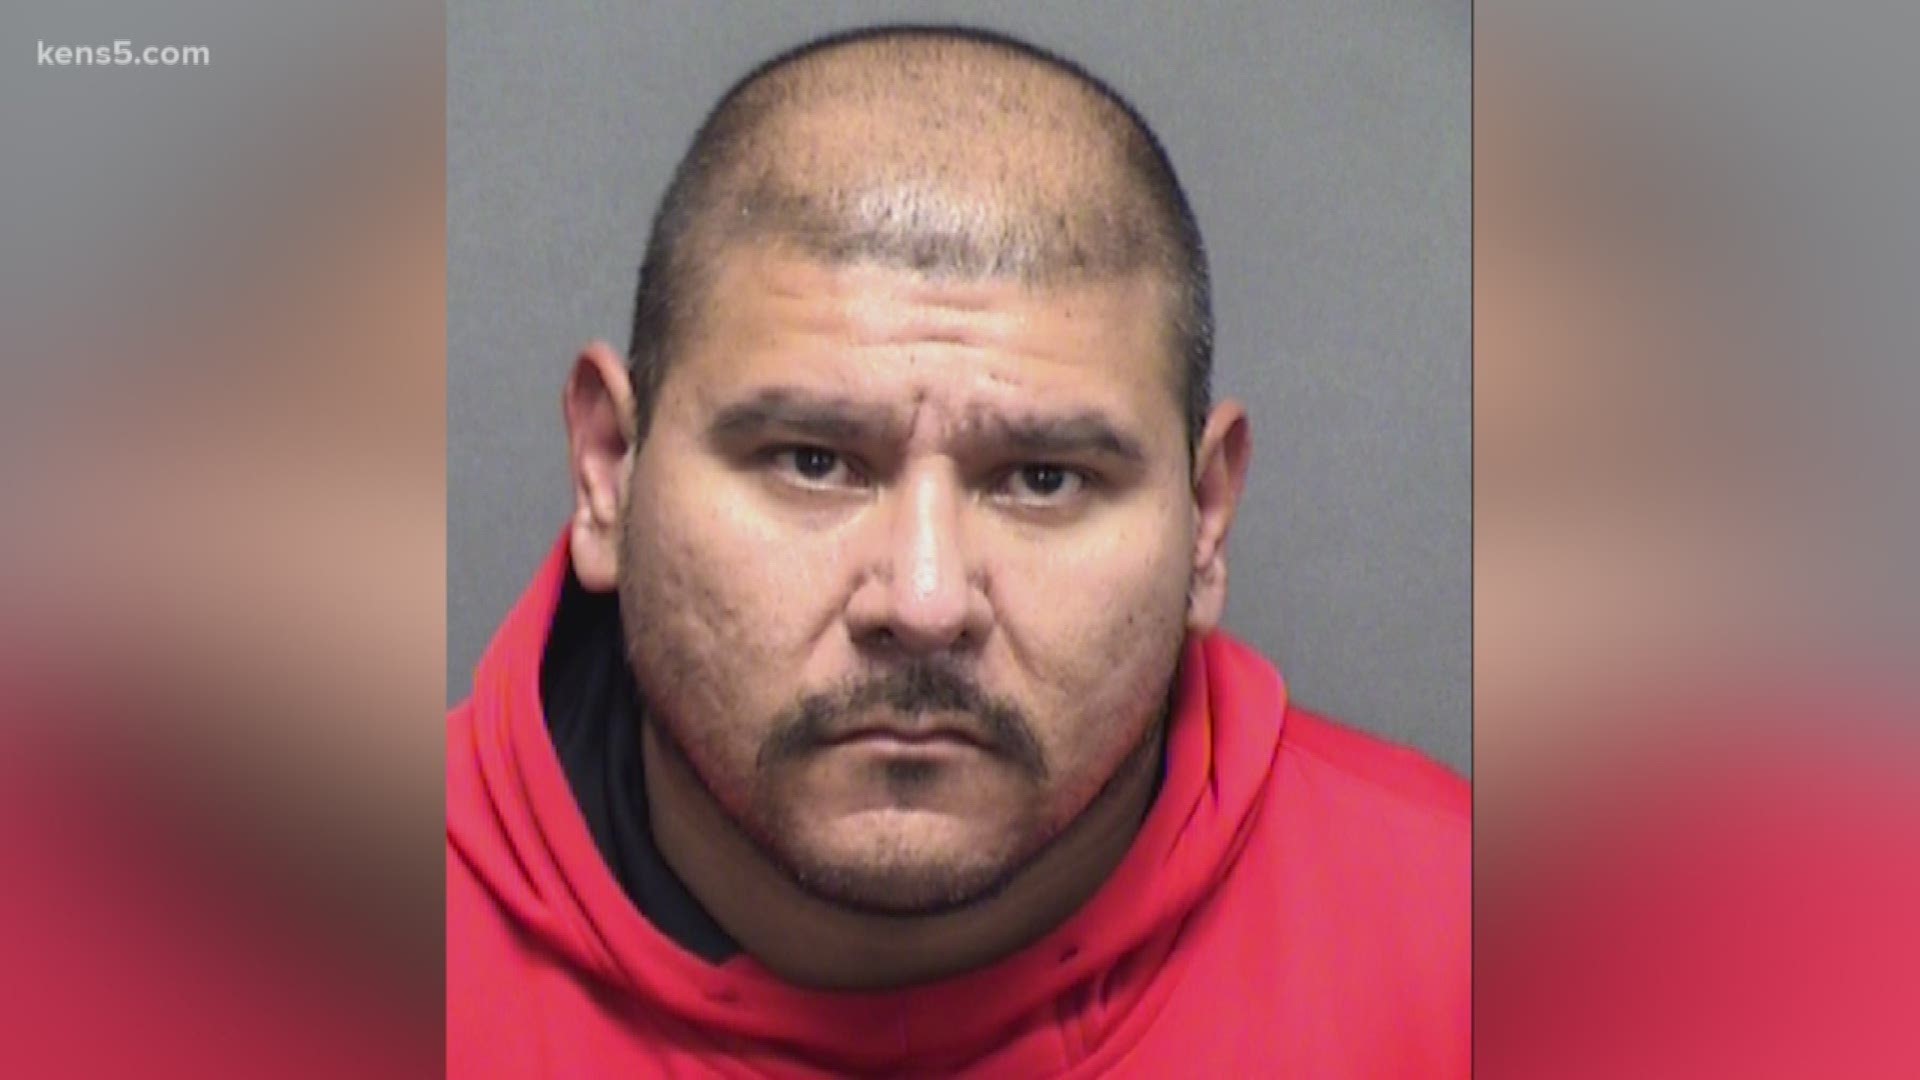 San Antonio Police say they when they busted one man for mail theft, they found another man with forged documents, so they arrested him too.